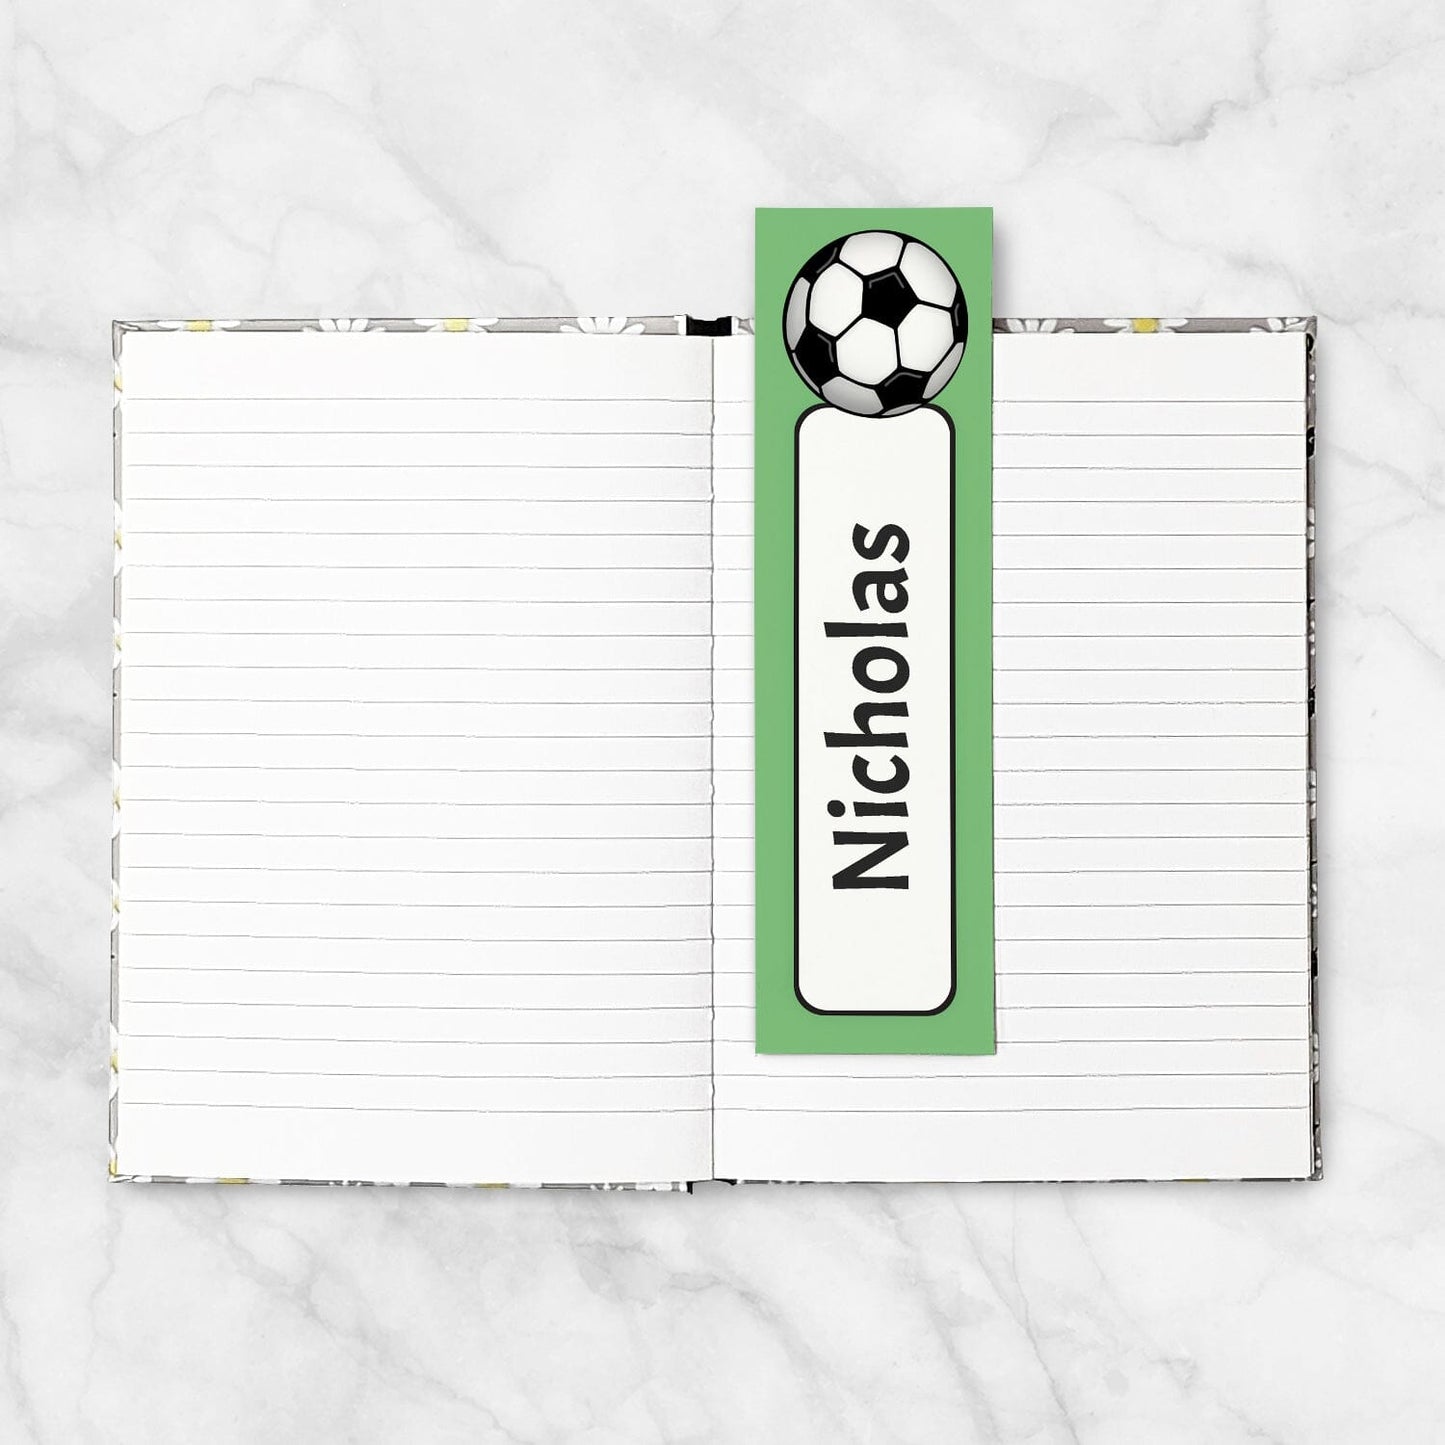 Printable Personalized Green Soccer Ball Bookmarks at Printable Planning. Example of bookmark in 5x7 book pages..